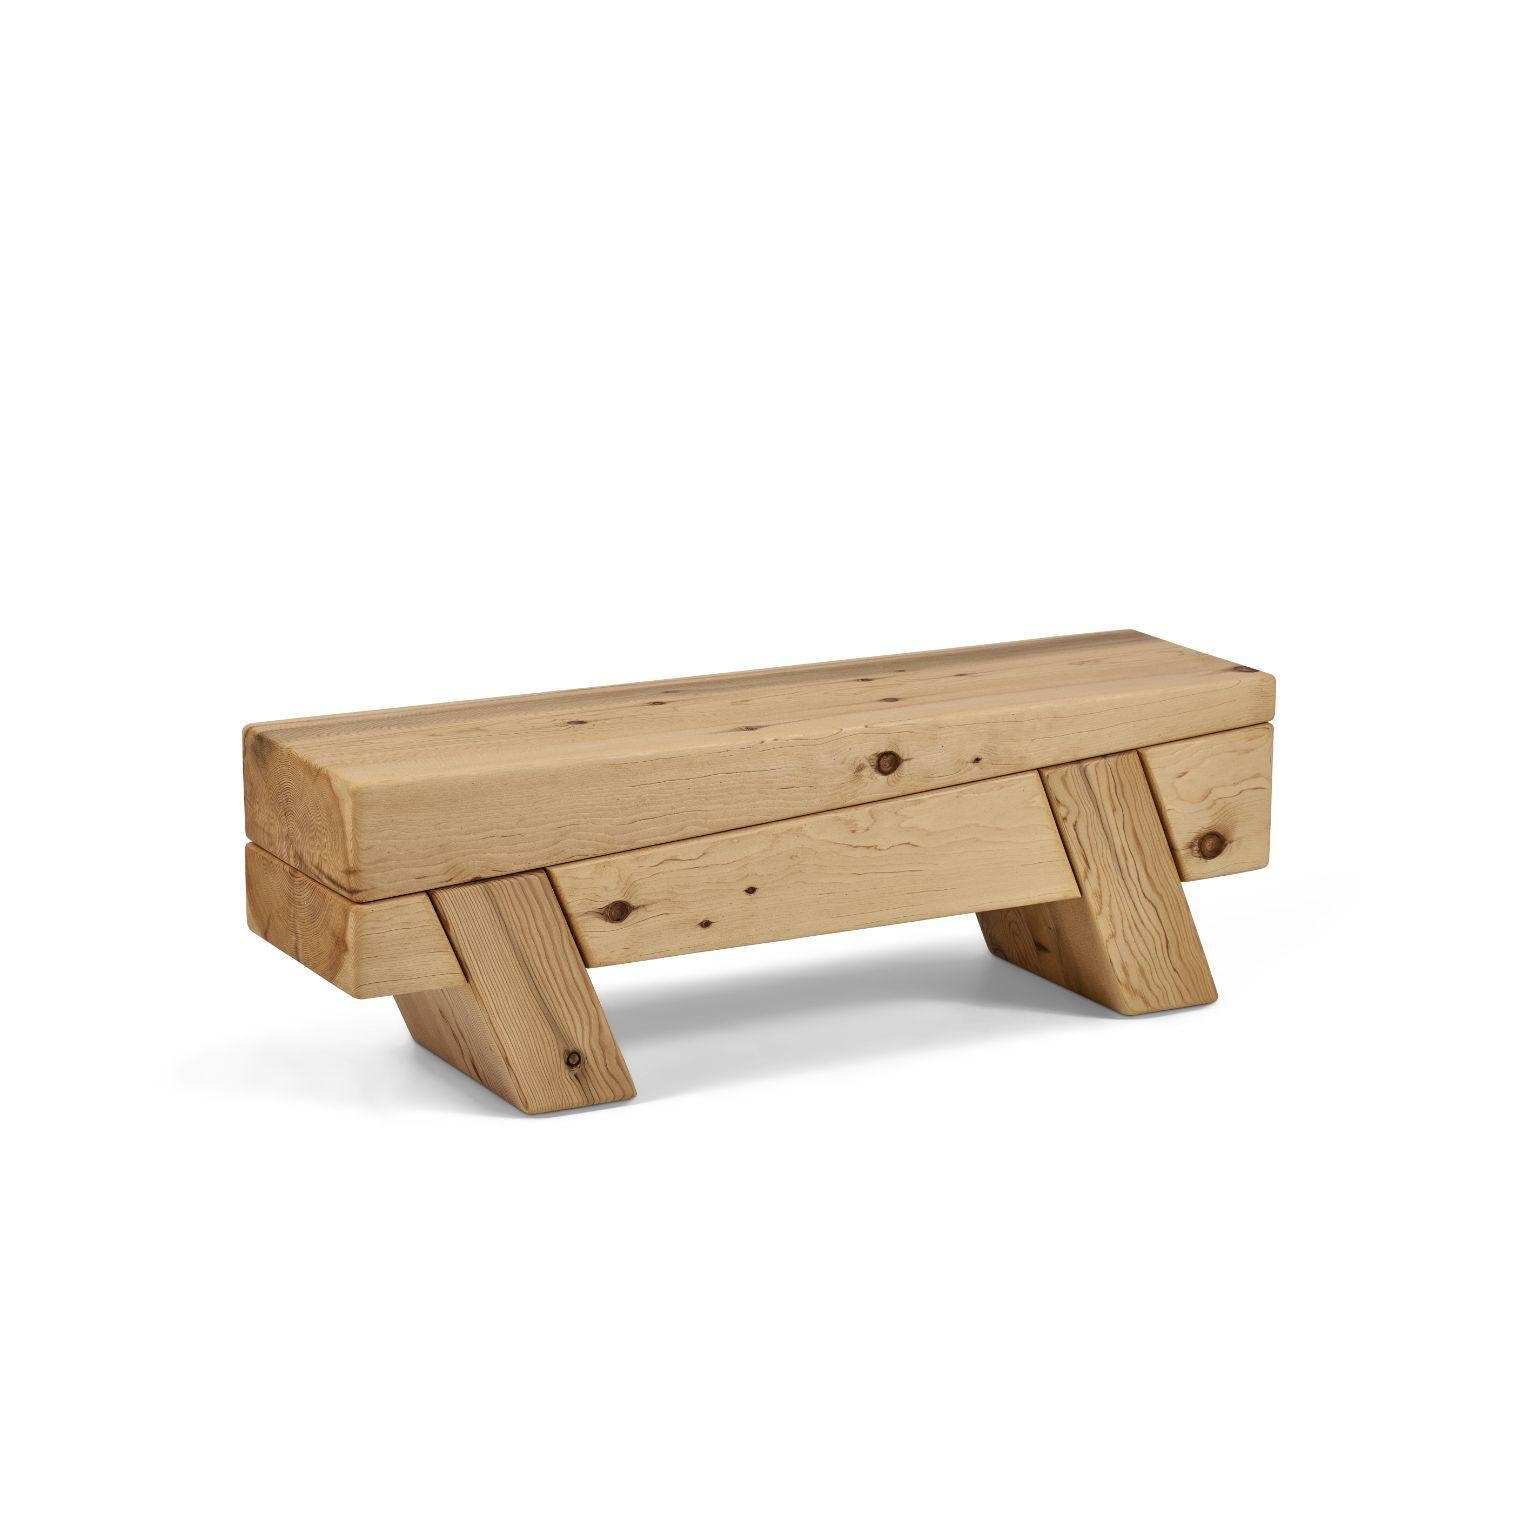 Aromatique Cedre Offcut Monoblock Bench by Contemporary Ecowood
Dimensions: W 117 x D 29 x H 38 cm.
Materials: Kiln Dried Turkish Oak
Finishing: Monocoat wood oil

The name 'OffCut' aptly describes the utilization of wooden blocks that might feature